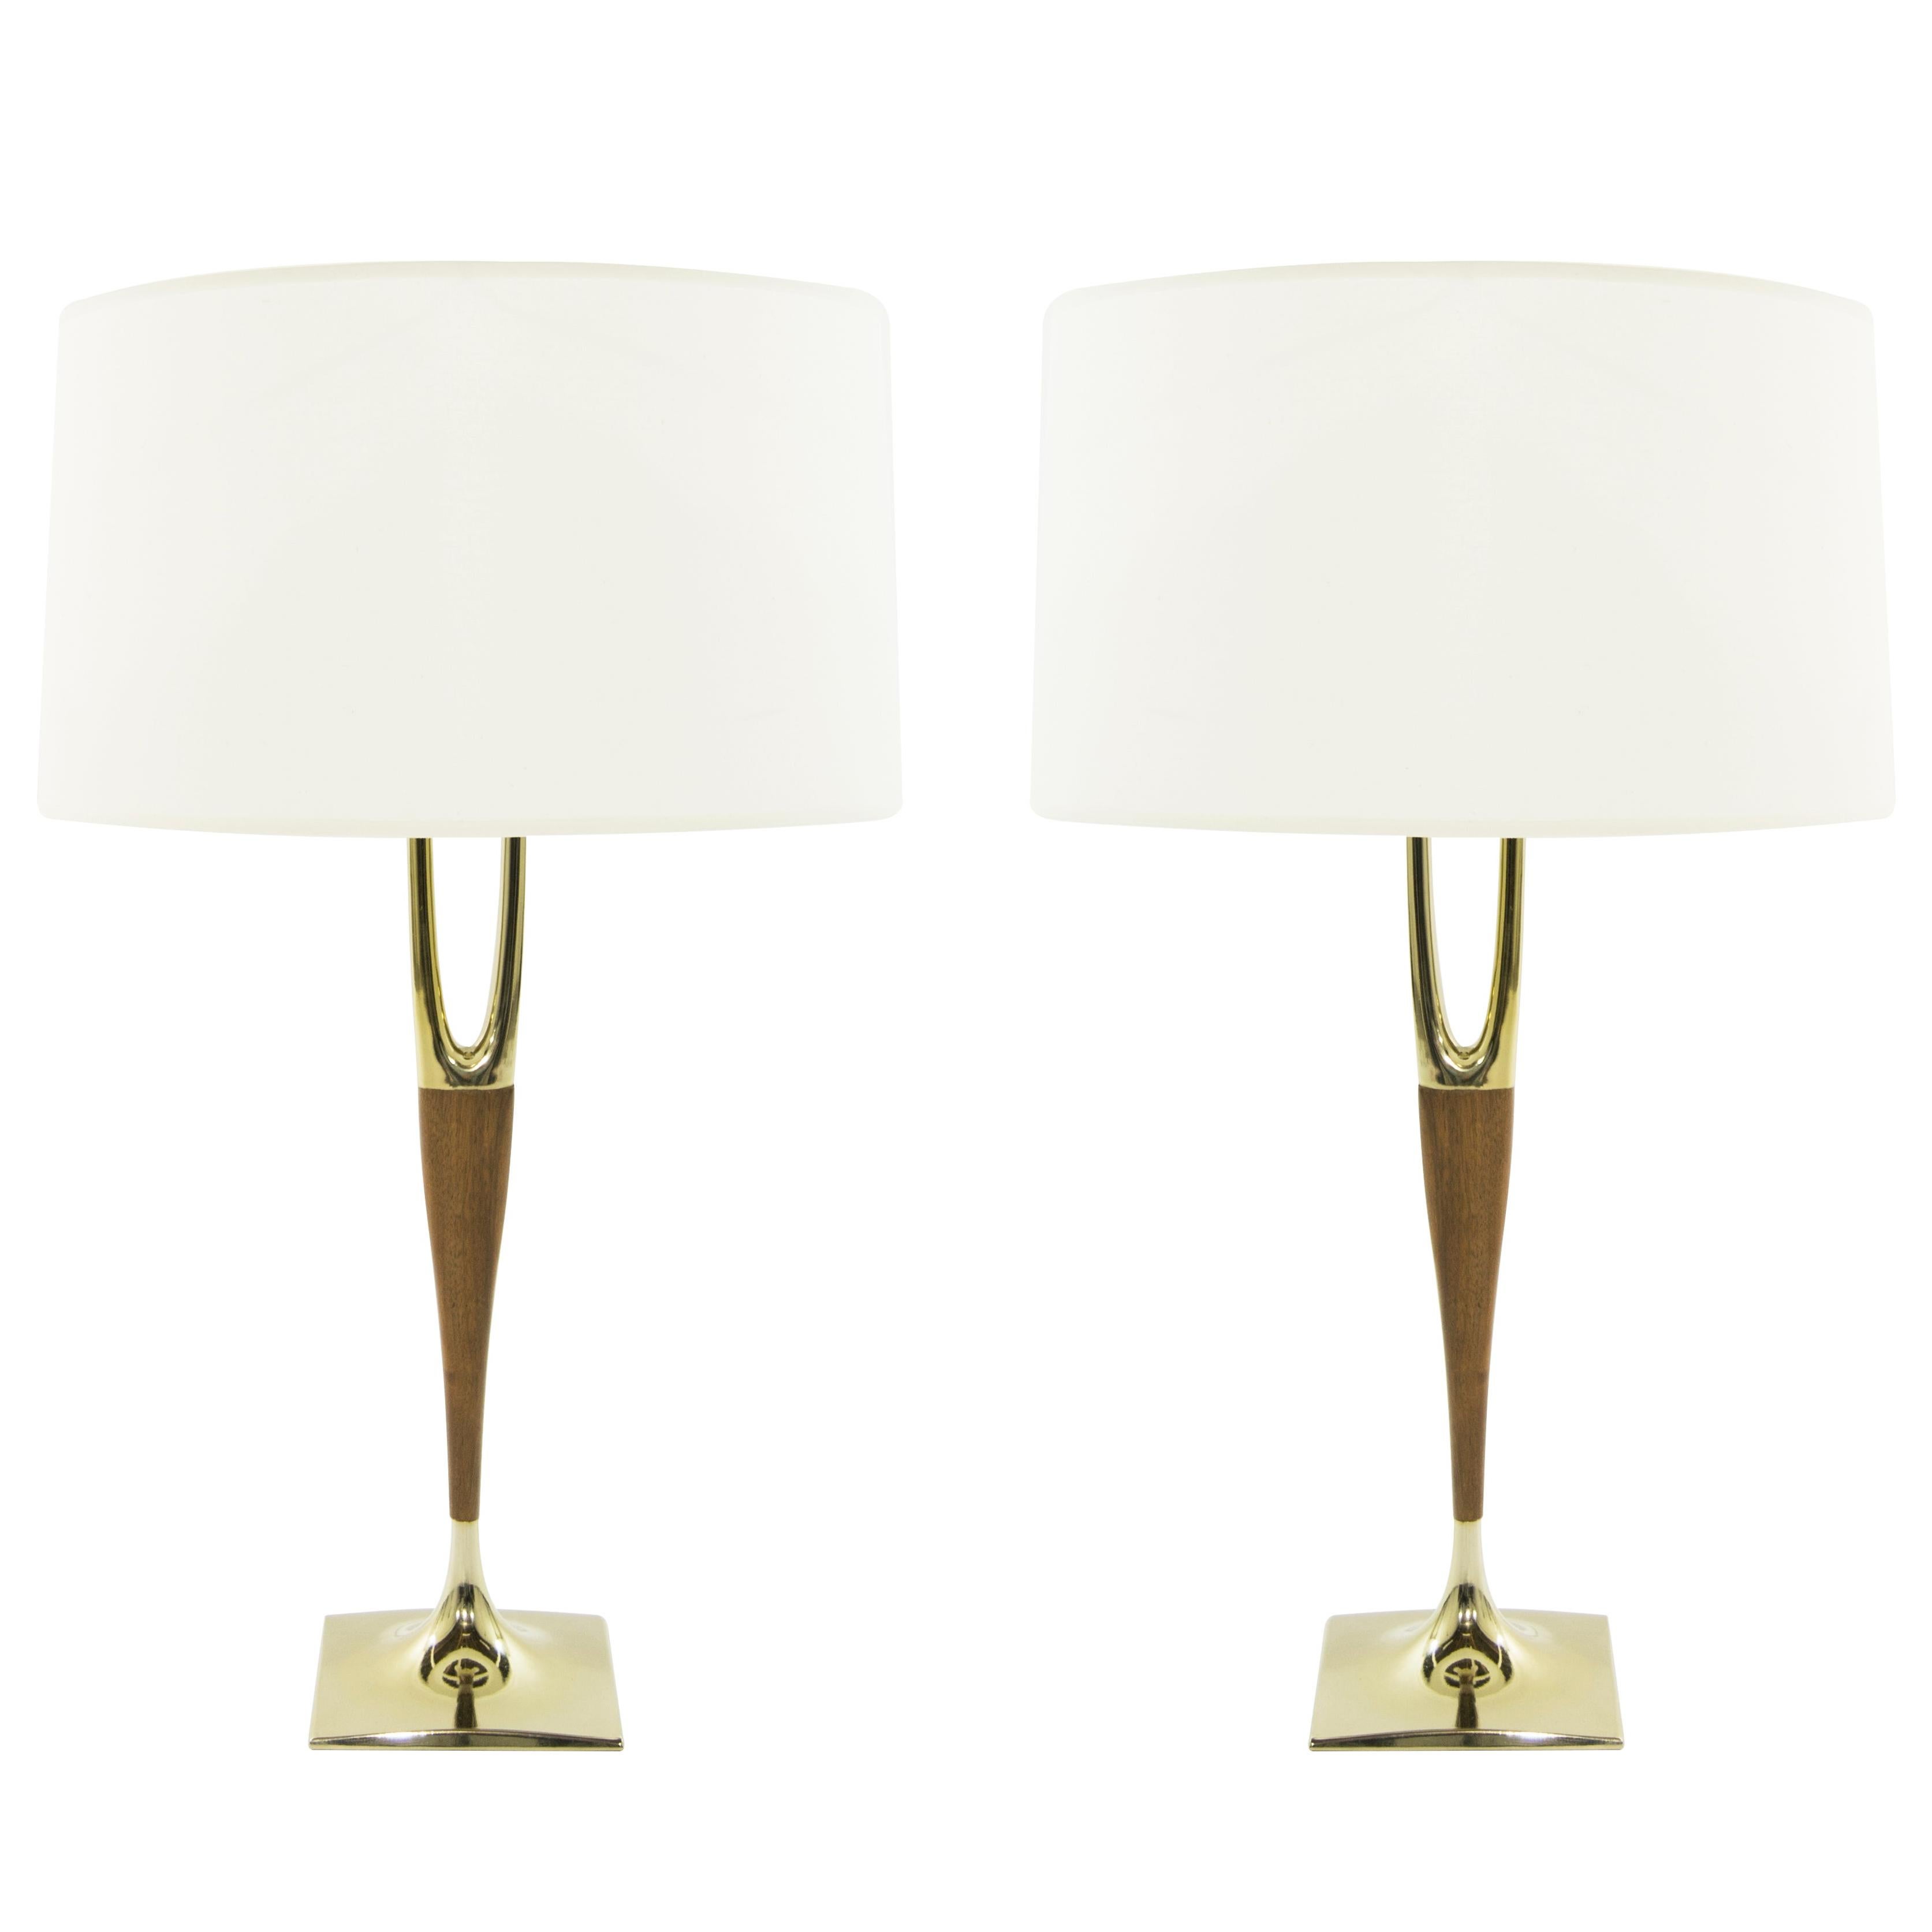 Gerald Thurston for Laurel Lamp Company Wishbone Table Lamps